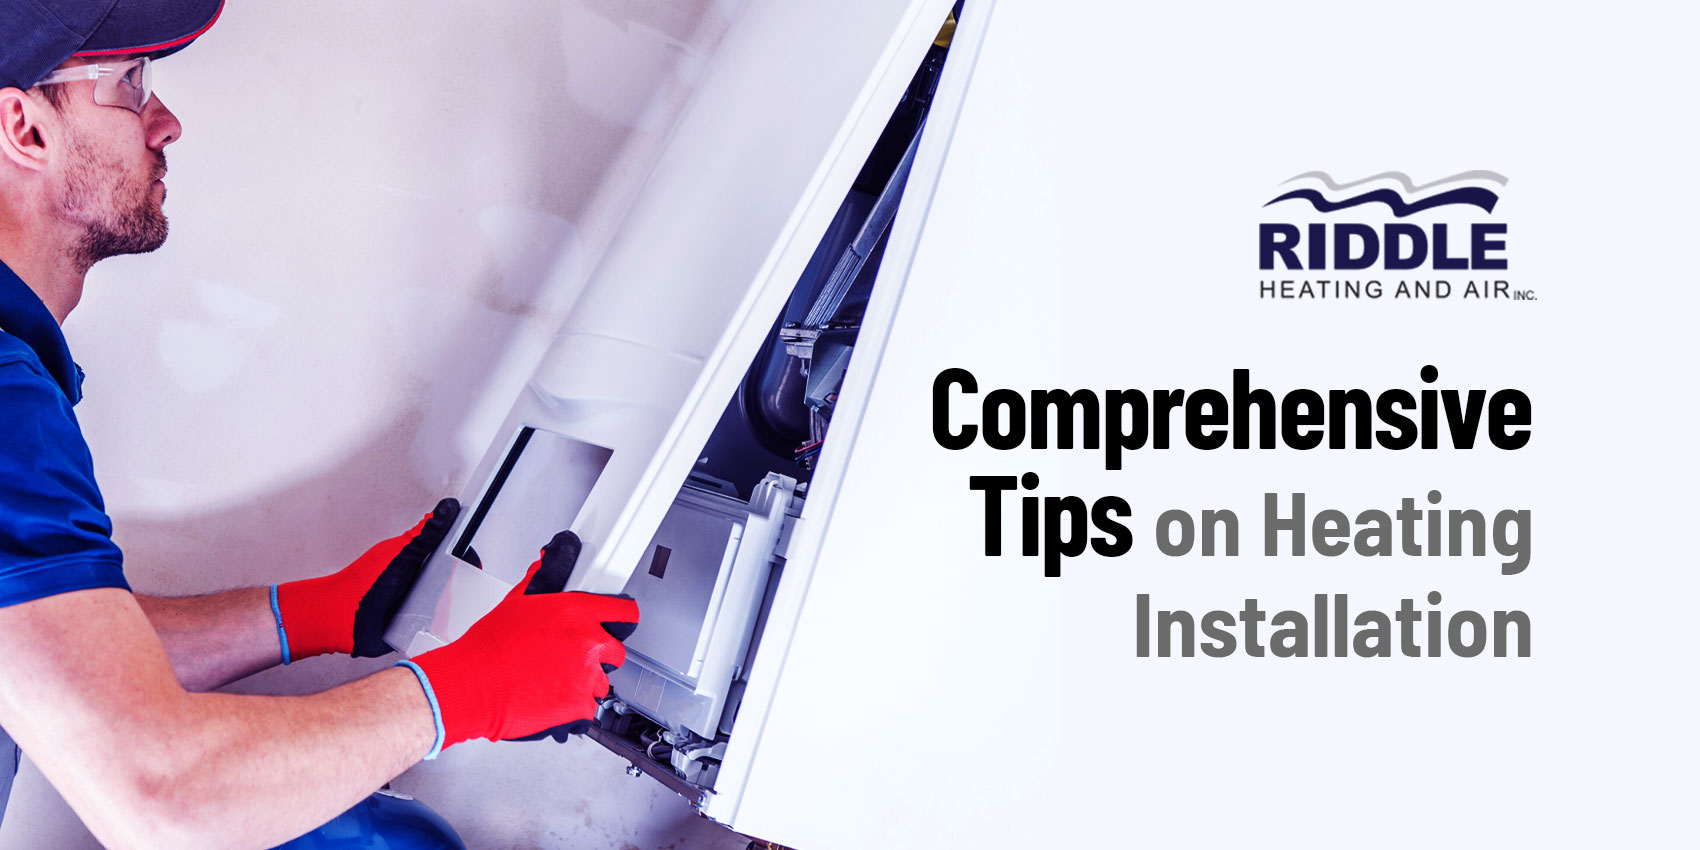 Comprehensive Tips on Heating Installation